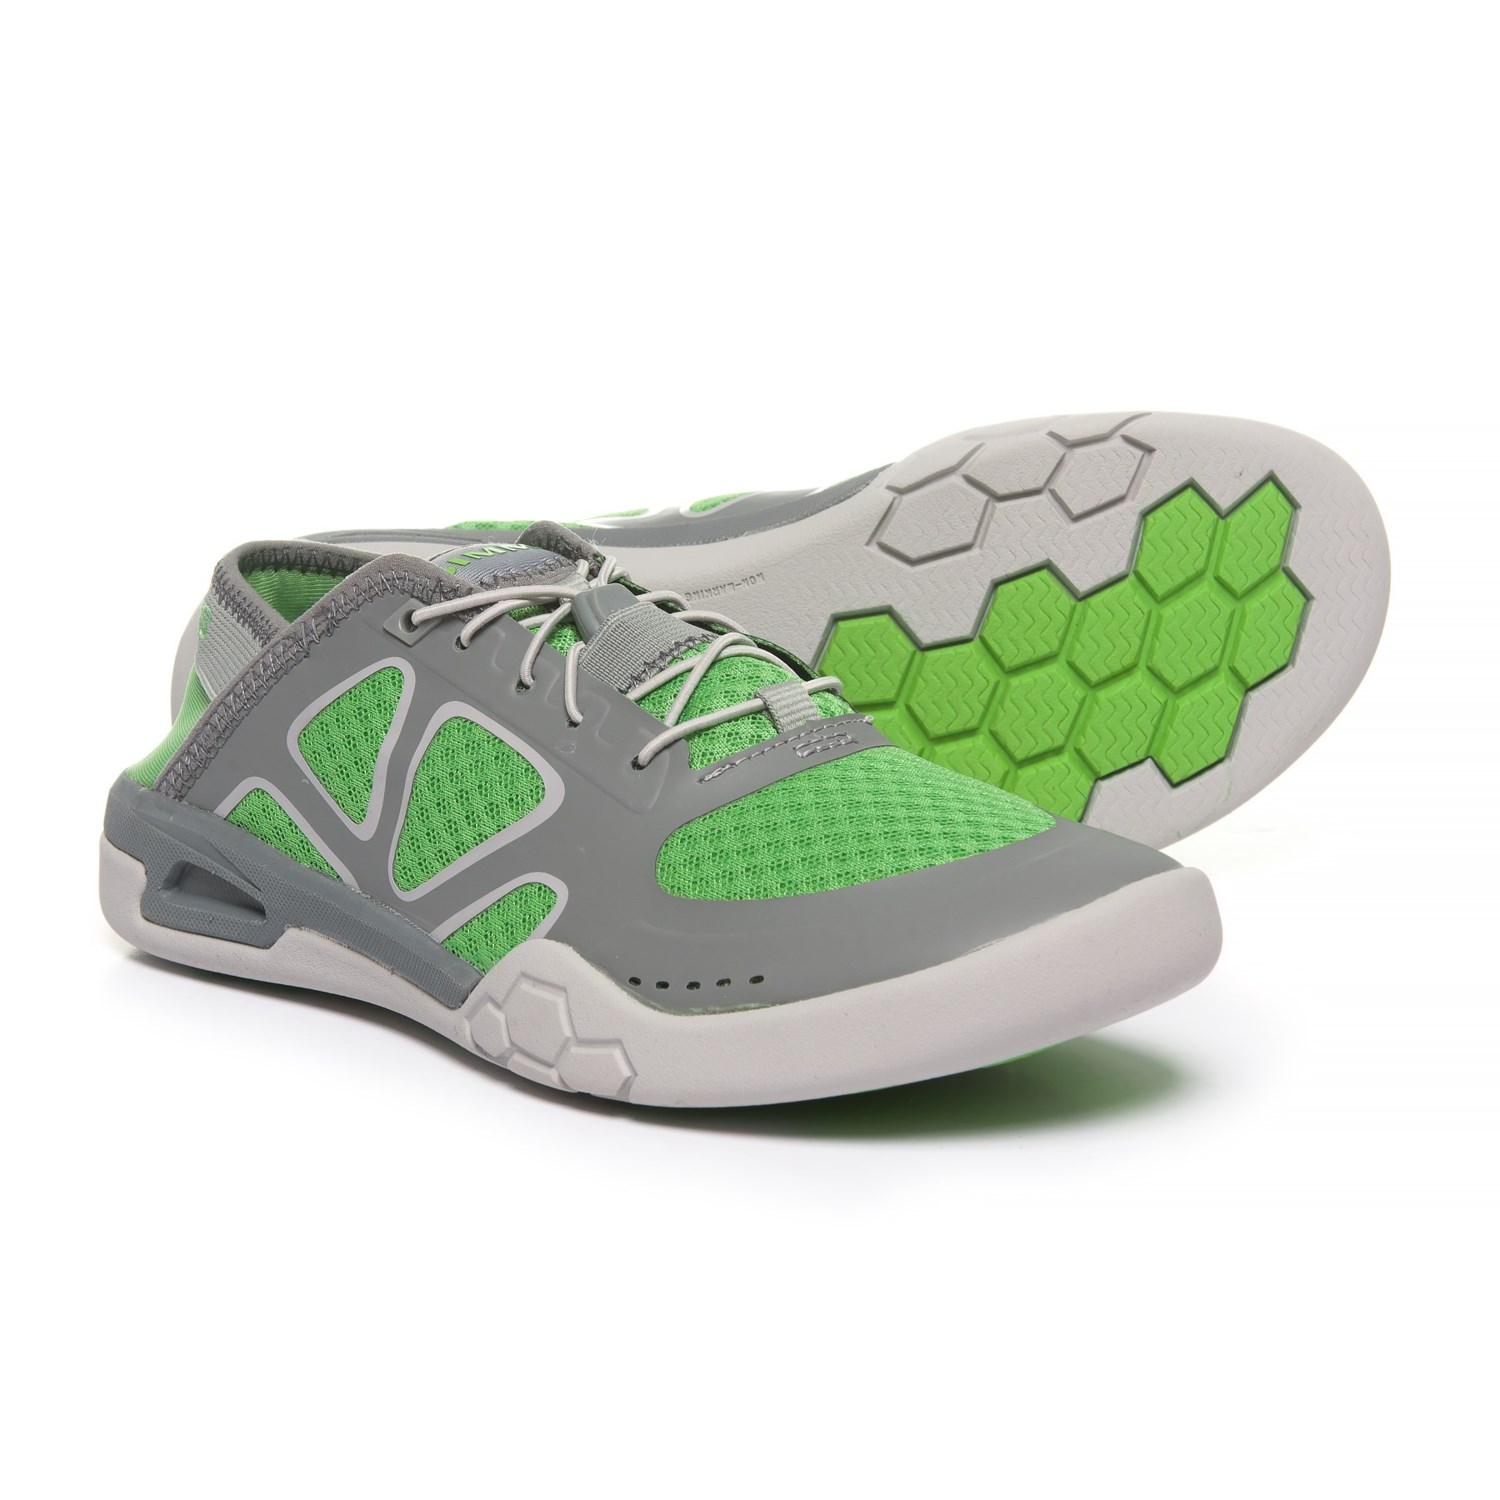 Simms Currents Shoes (For Women) - Save 79%